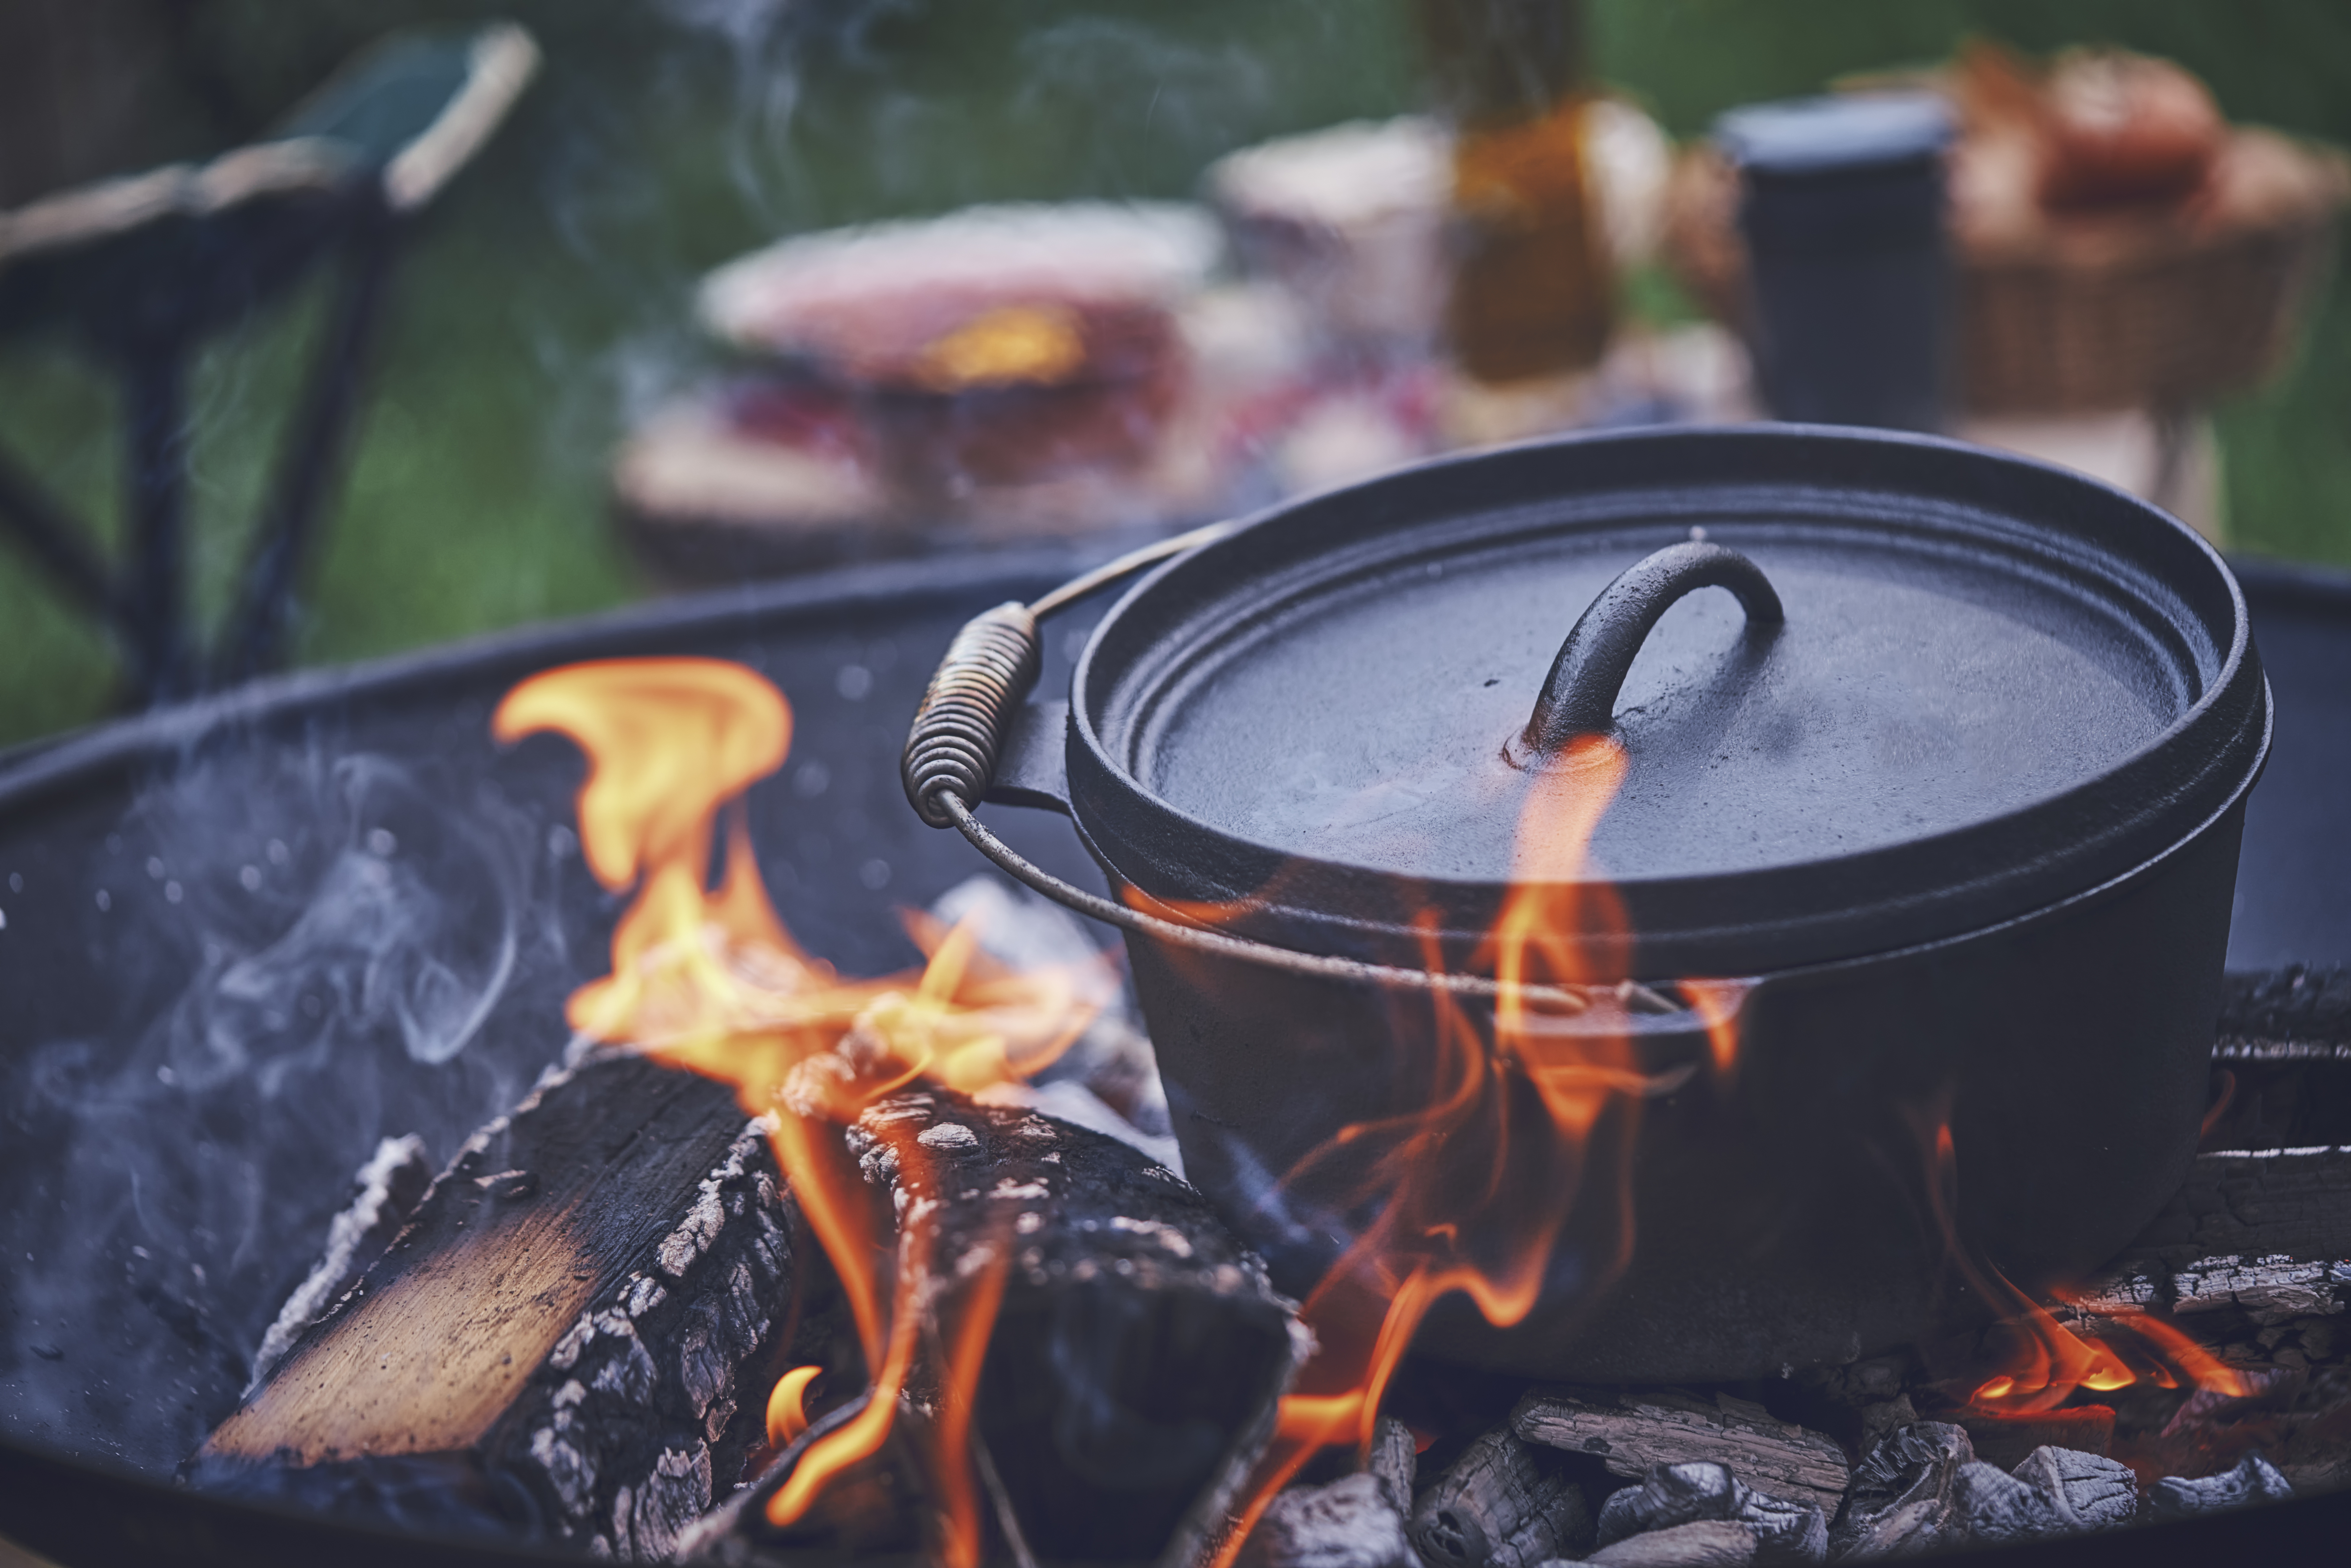 https://www.wideopenspaces.com/wp-content/uploads/sites/3/2021/05/cast-iron-dutch-oven-over-cooking-over-campfire.jpg?fit=7952%2C5304